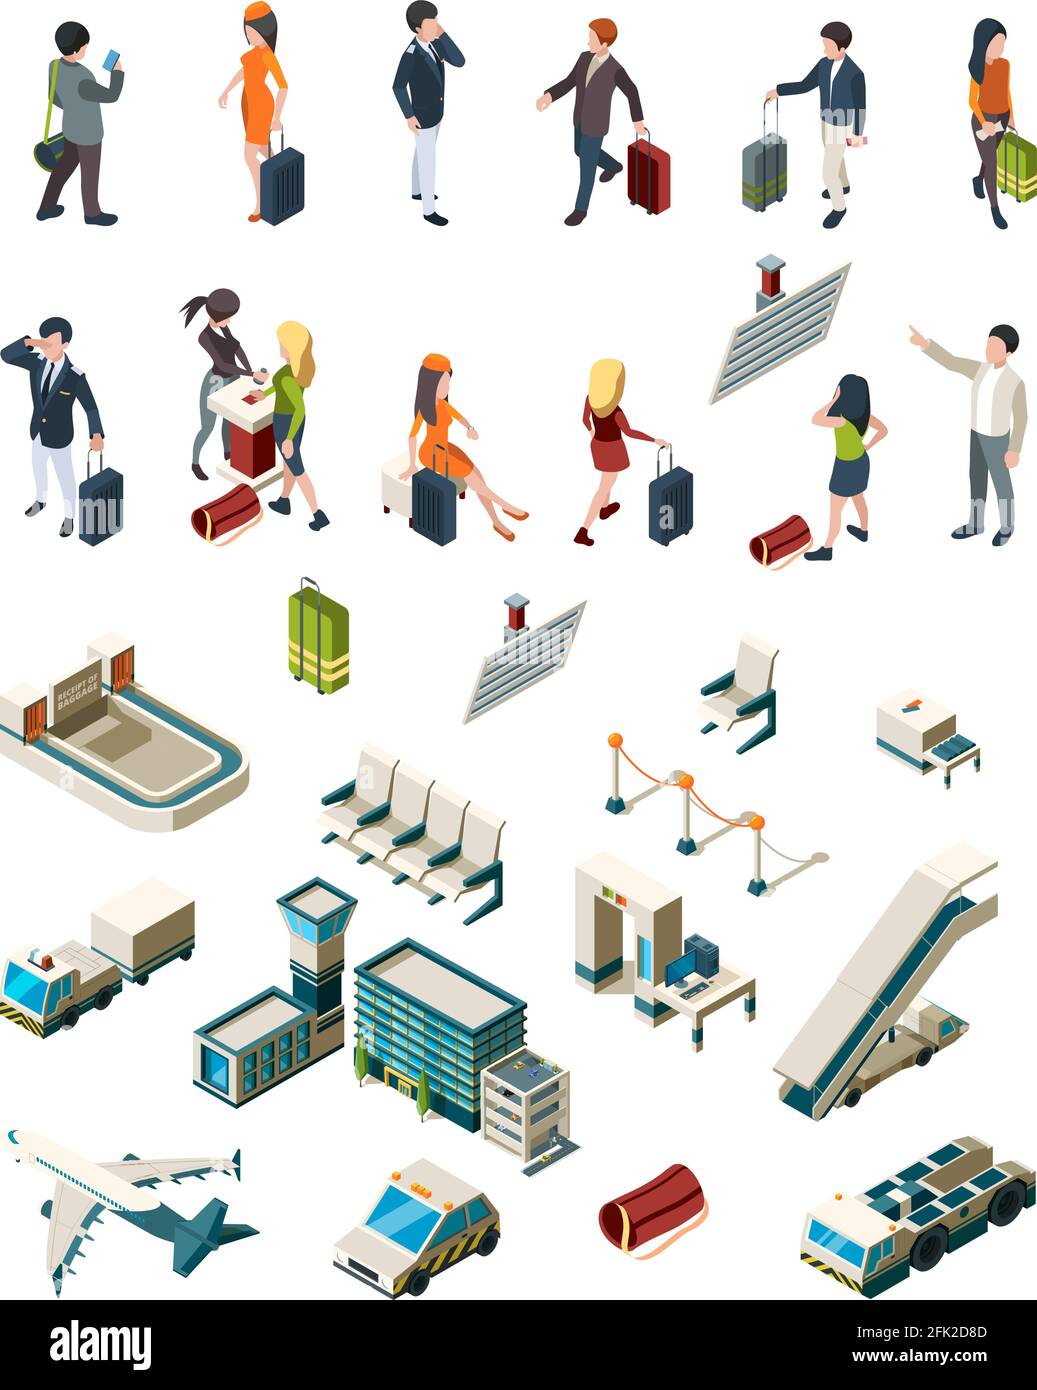 Airport terminal. People pilots flight attendants travellers airport interior luggage boarding ticketing vector isometric Stock Vector